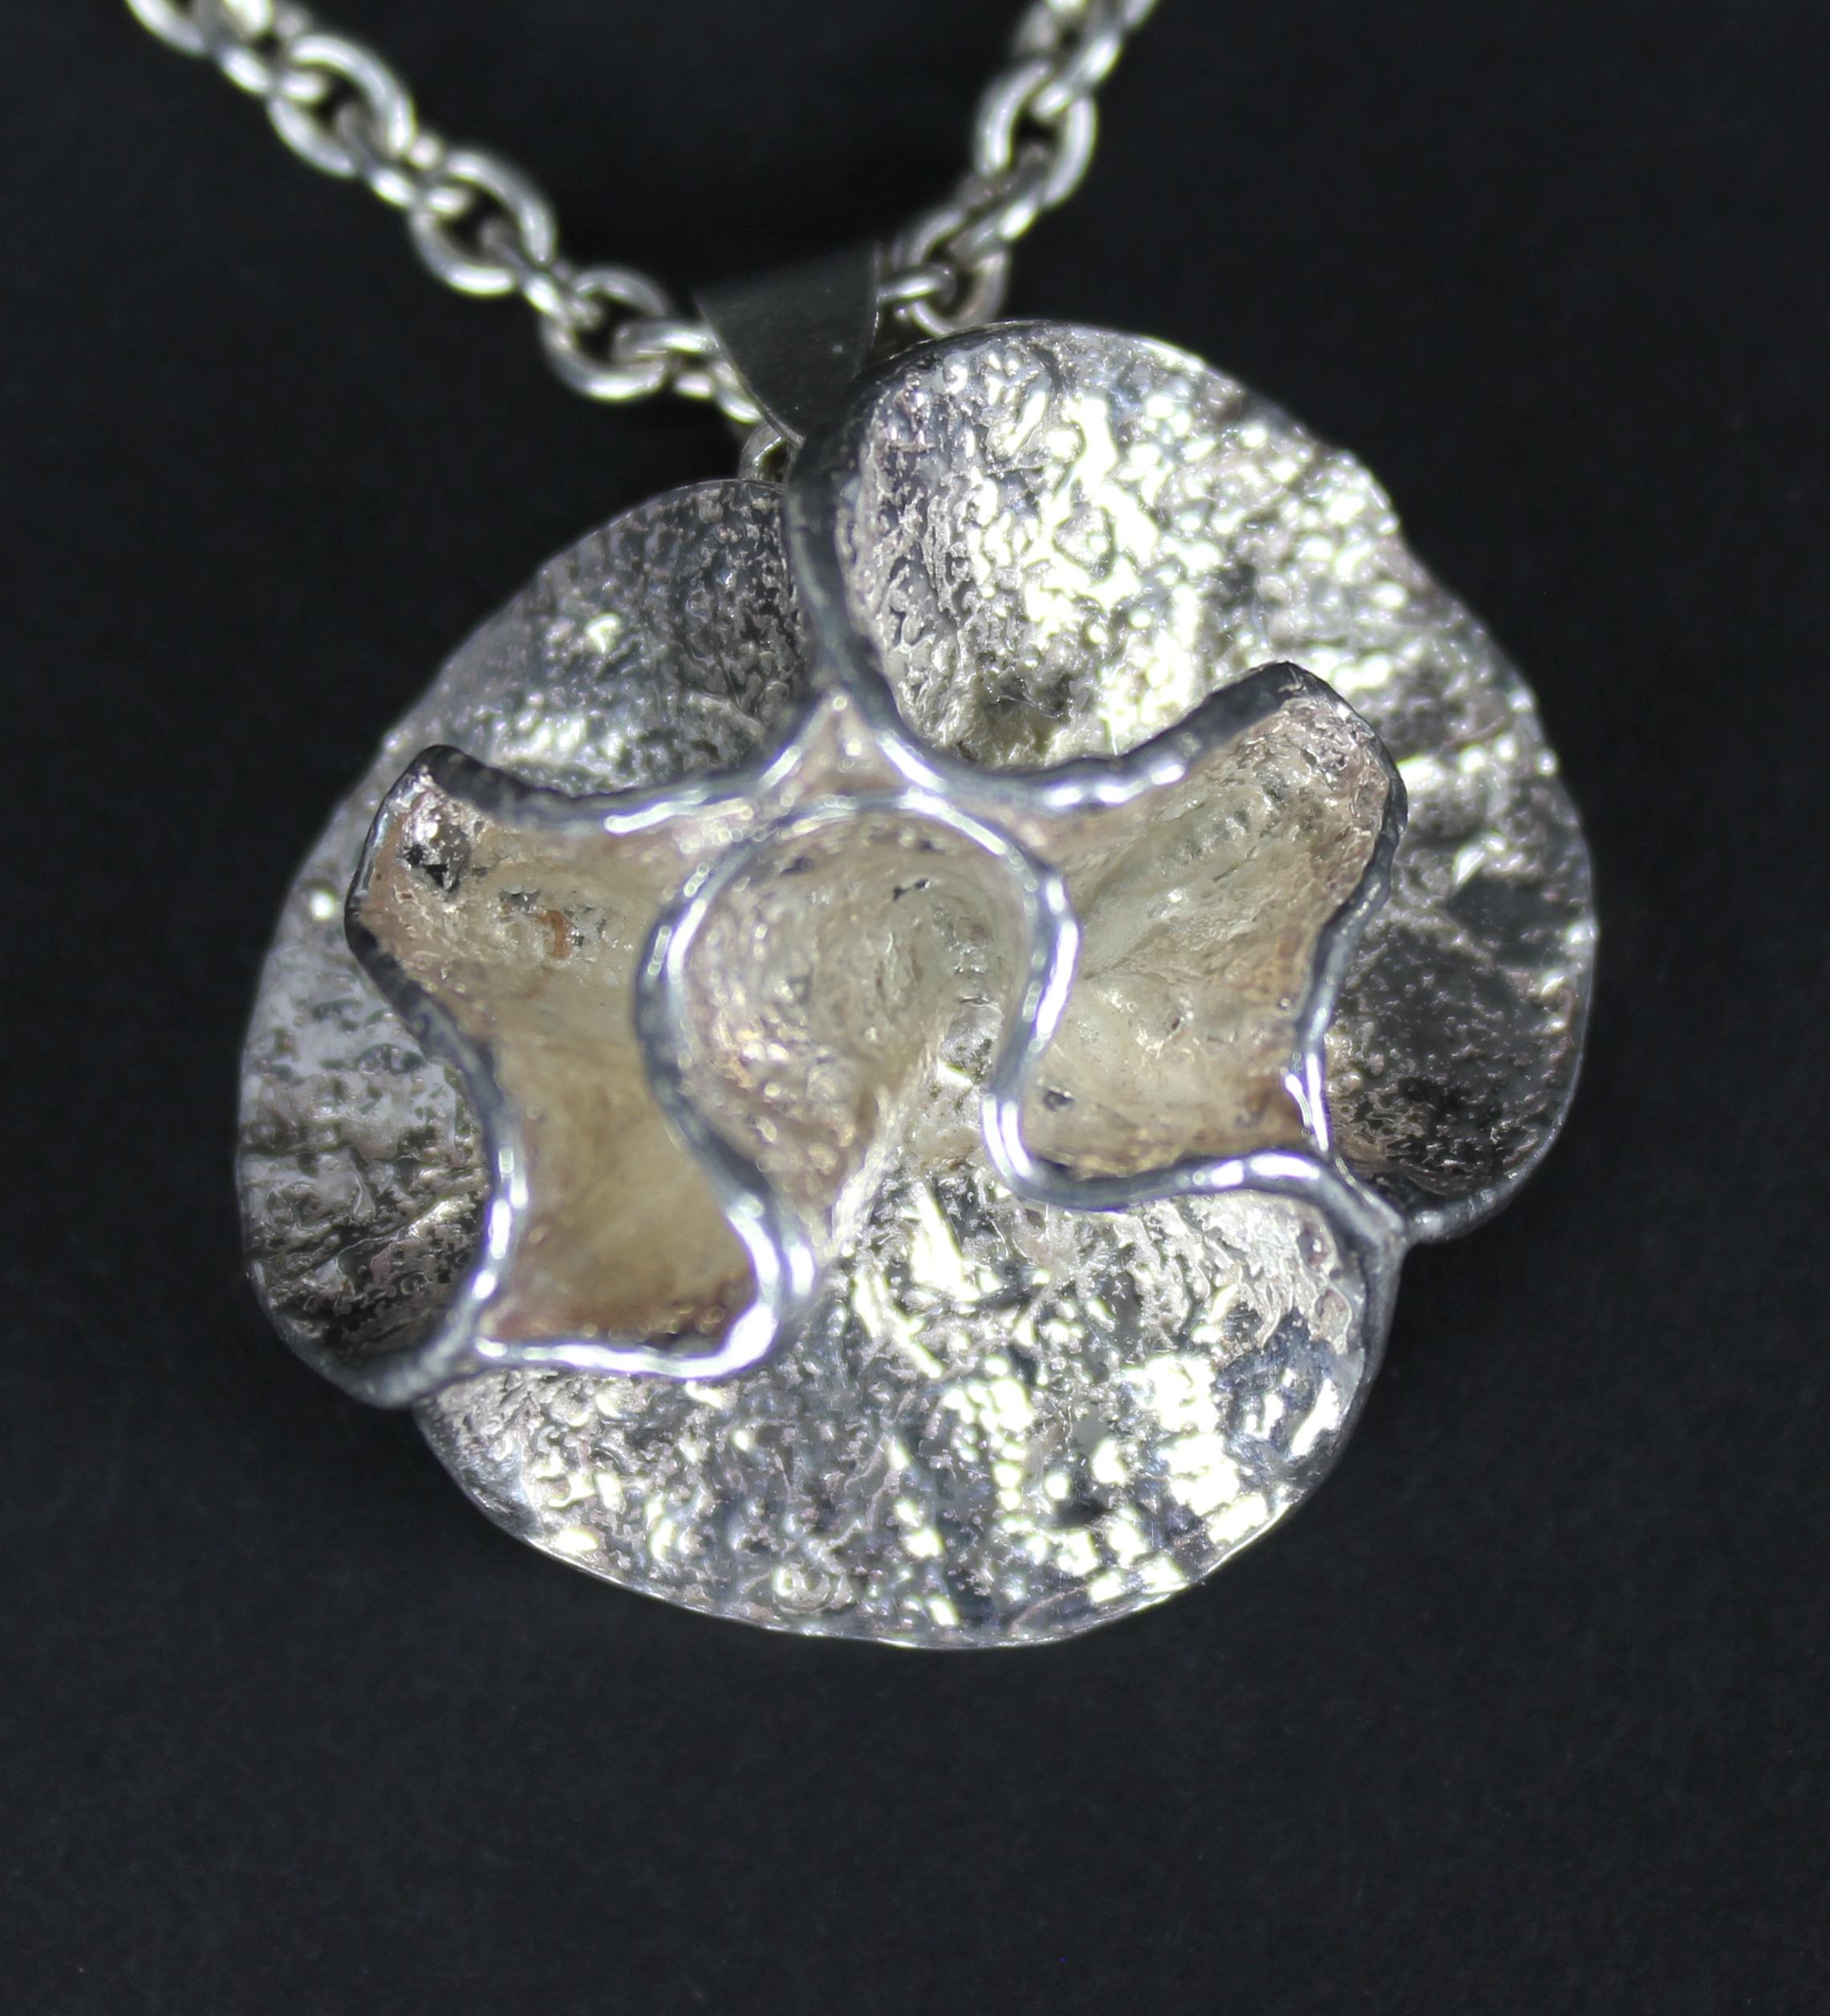 Very nice flower pendant by Theresia Hvorslev for Mema in 1976.
Marked 